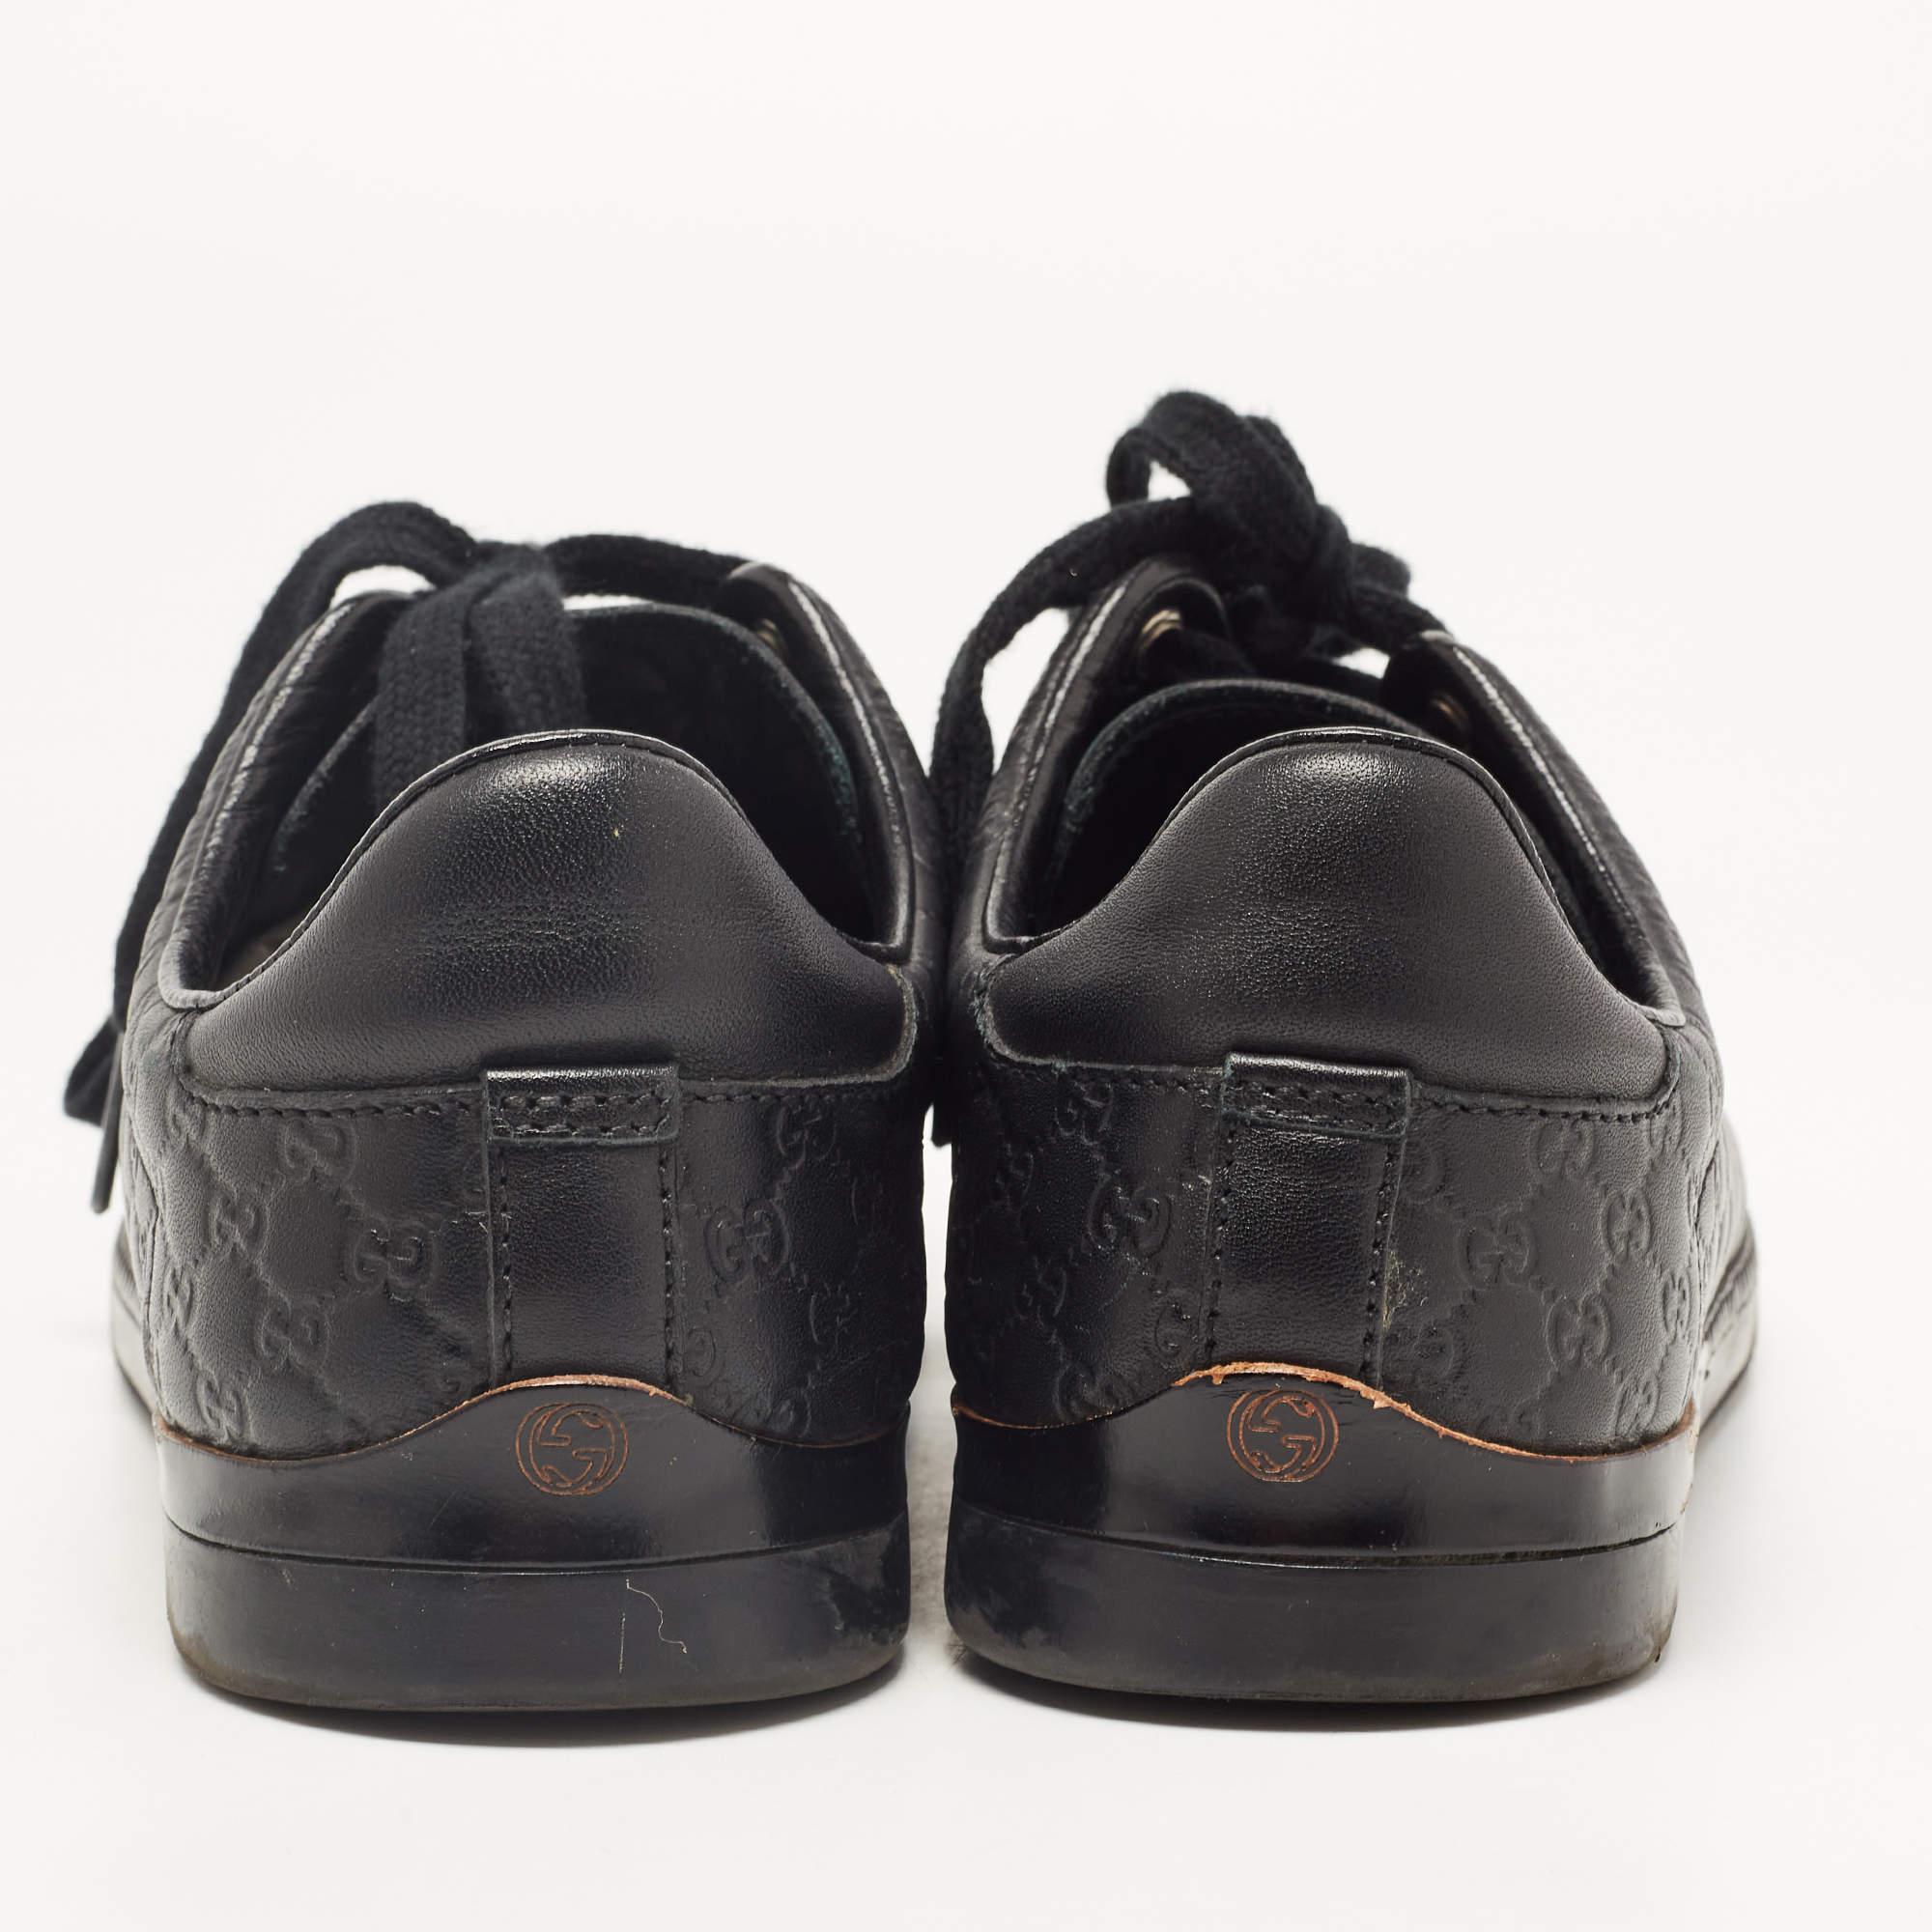 Gucci Black Microguccissima Leather Low Top Sneakers Size 35.5 For Sale 3